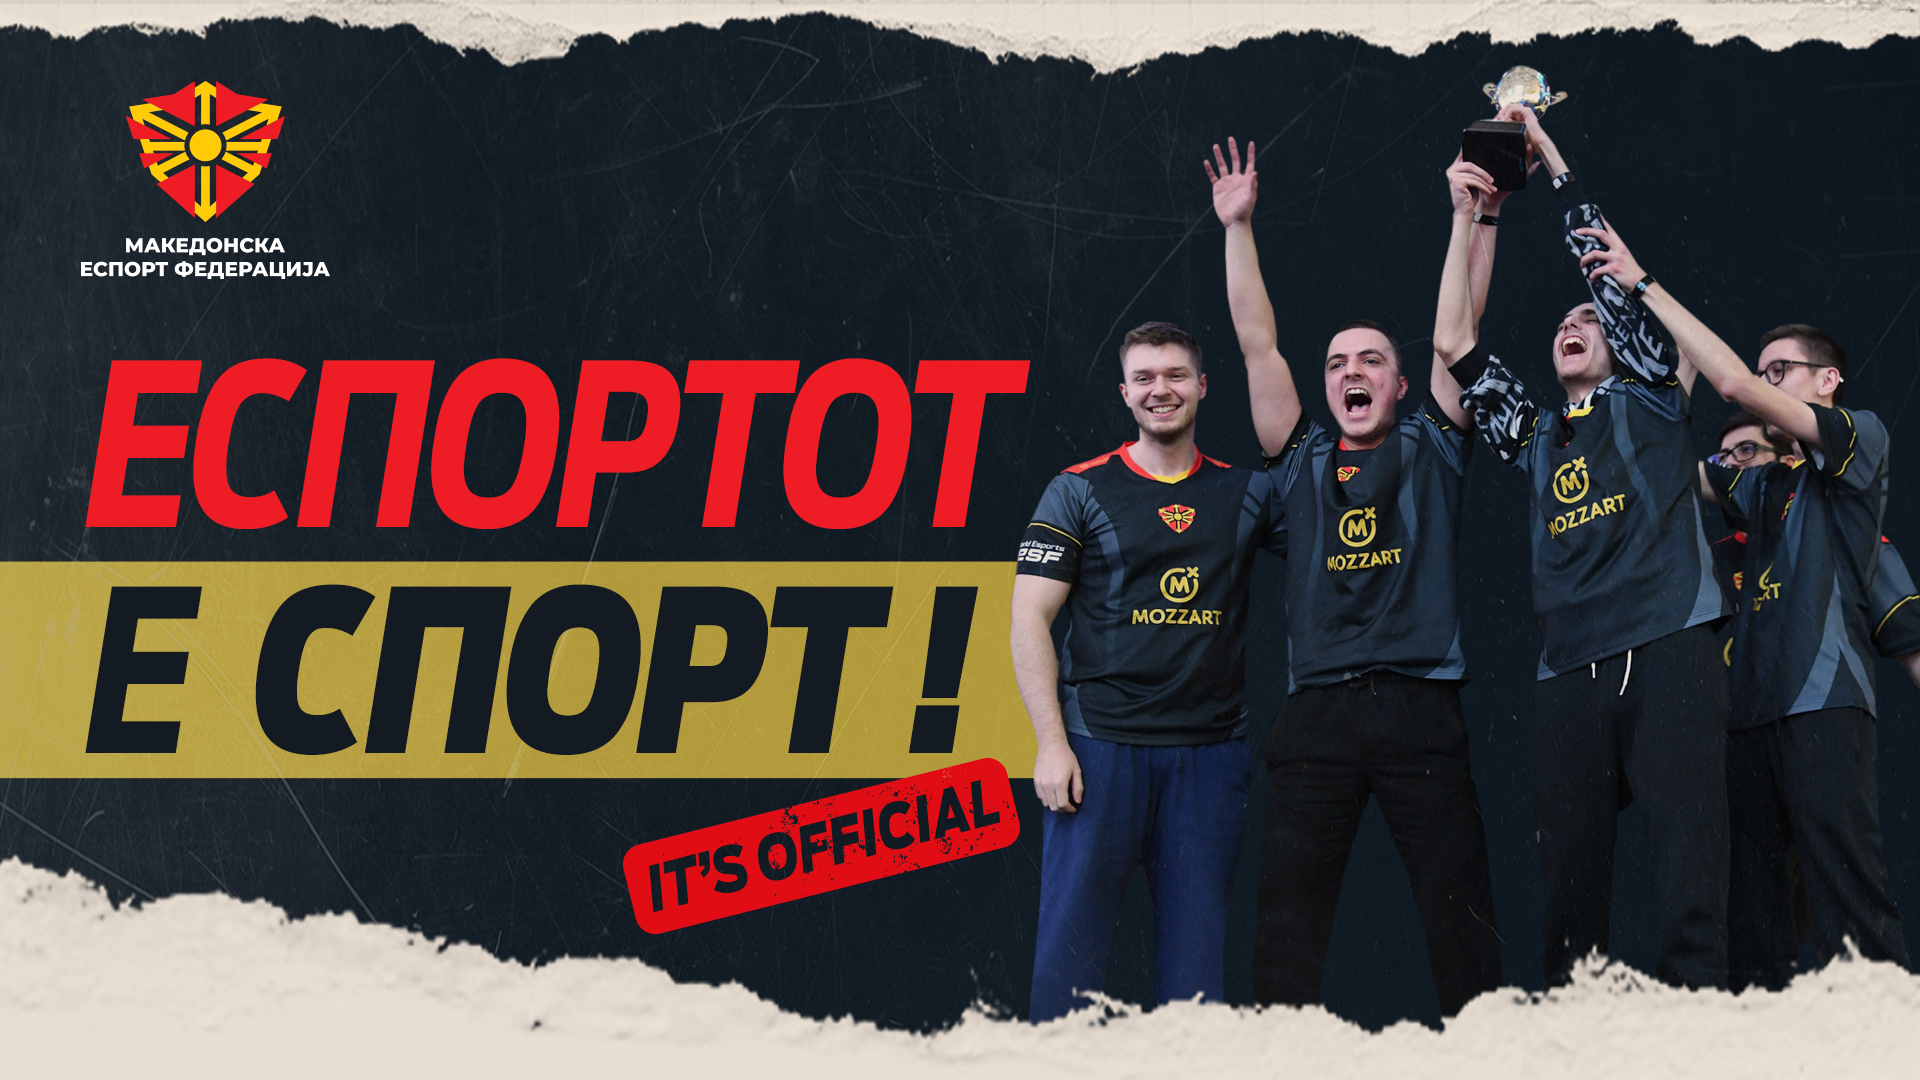 North Macedonia formally recognises esports